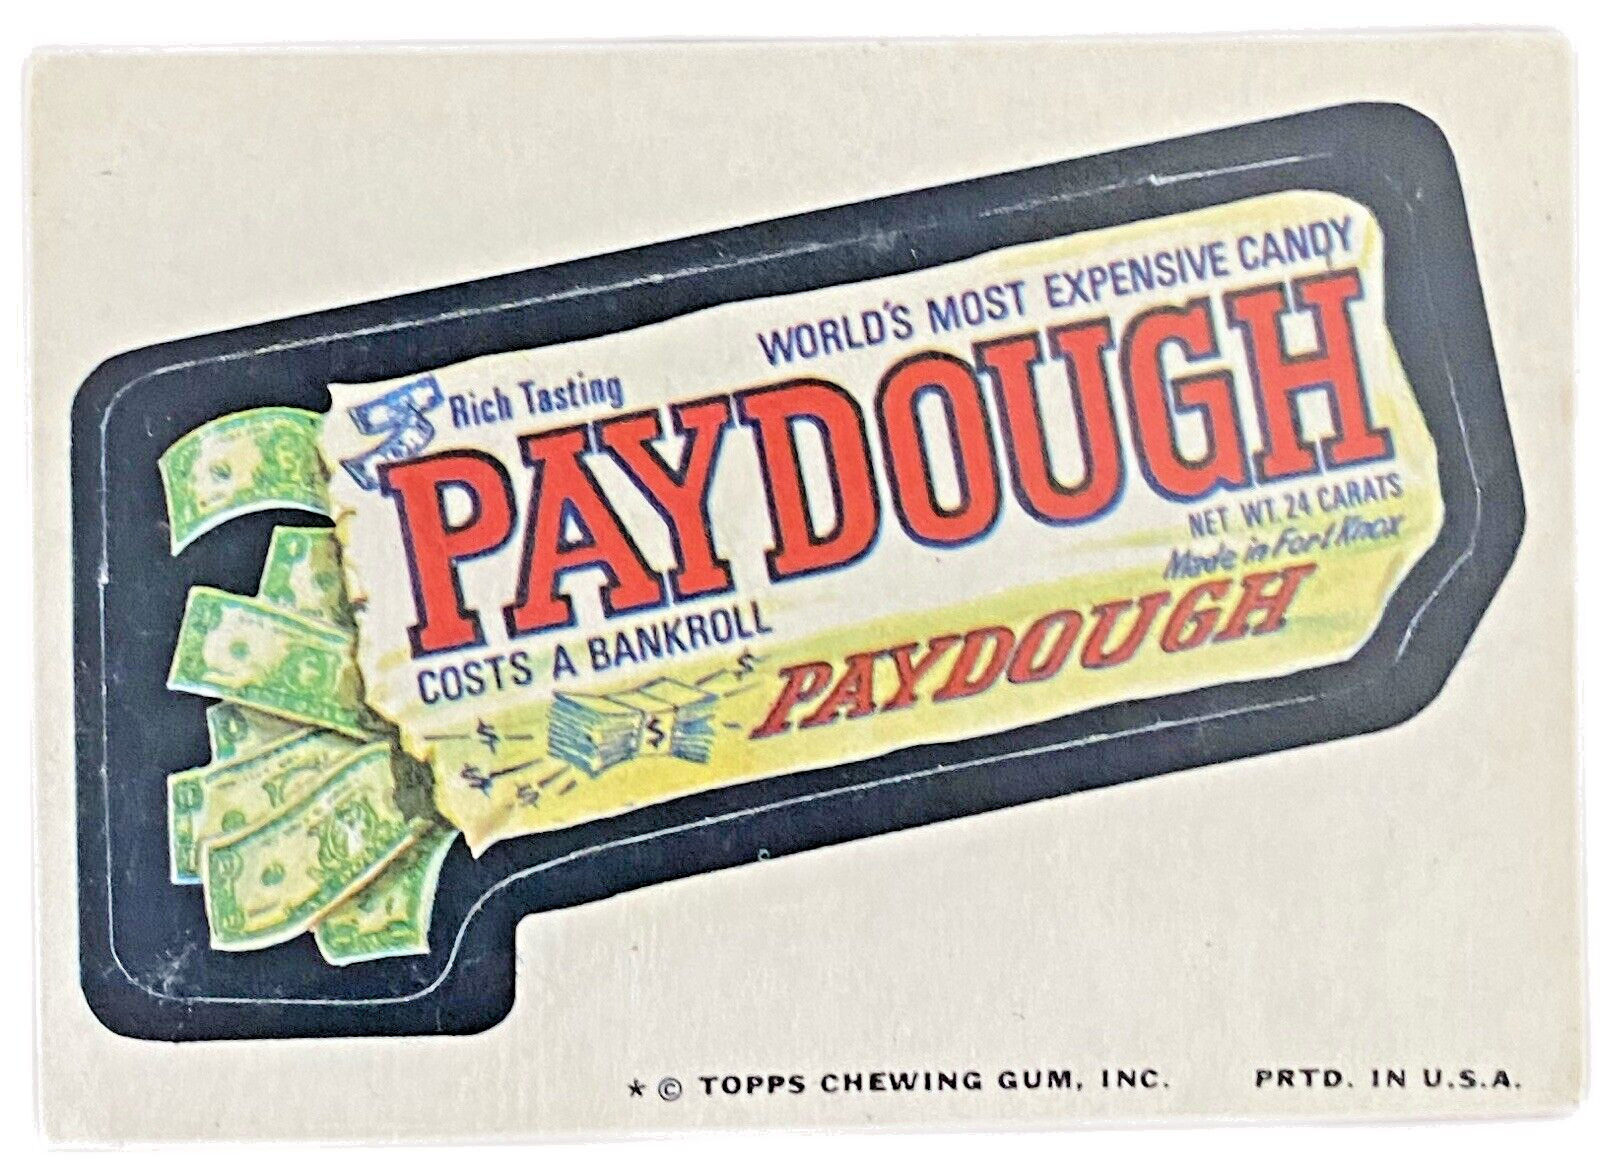 Vintage 1975 Topps WACKY PACKAGES Sticker Paydough Candy